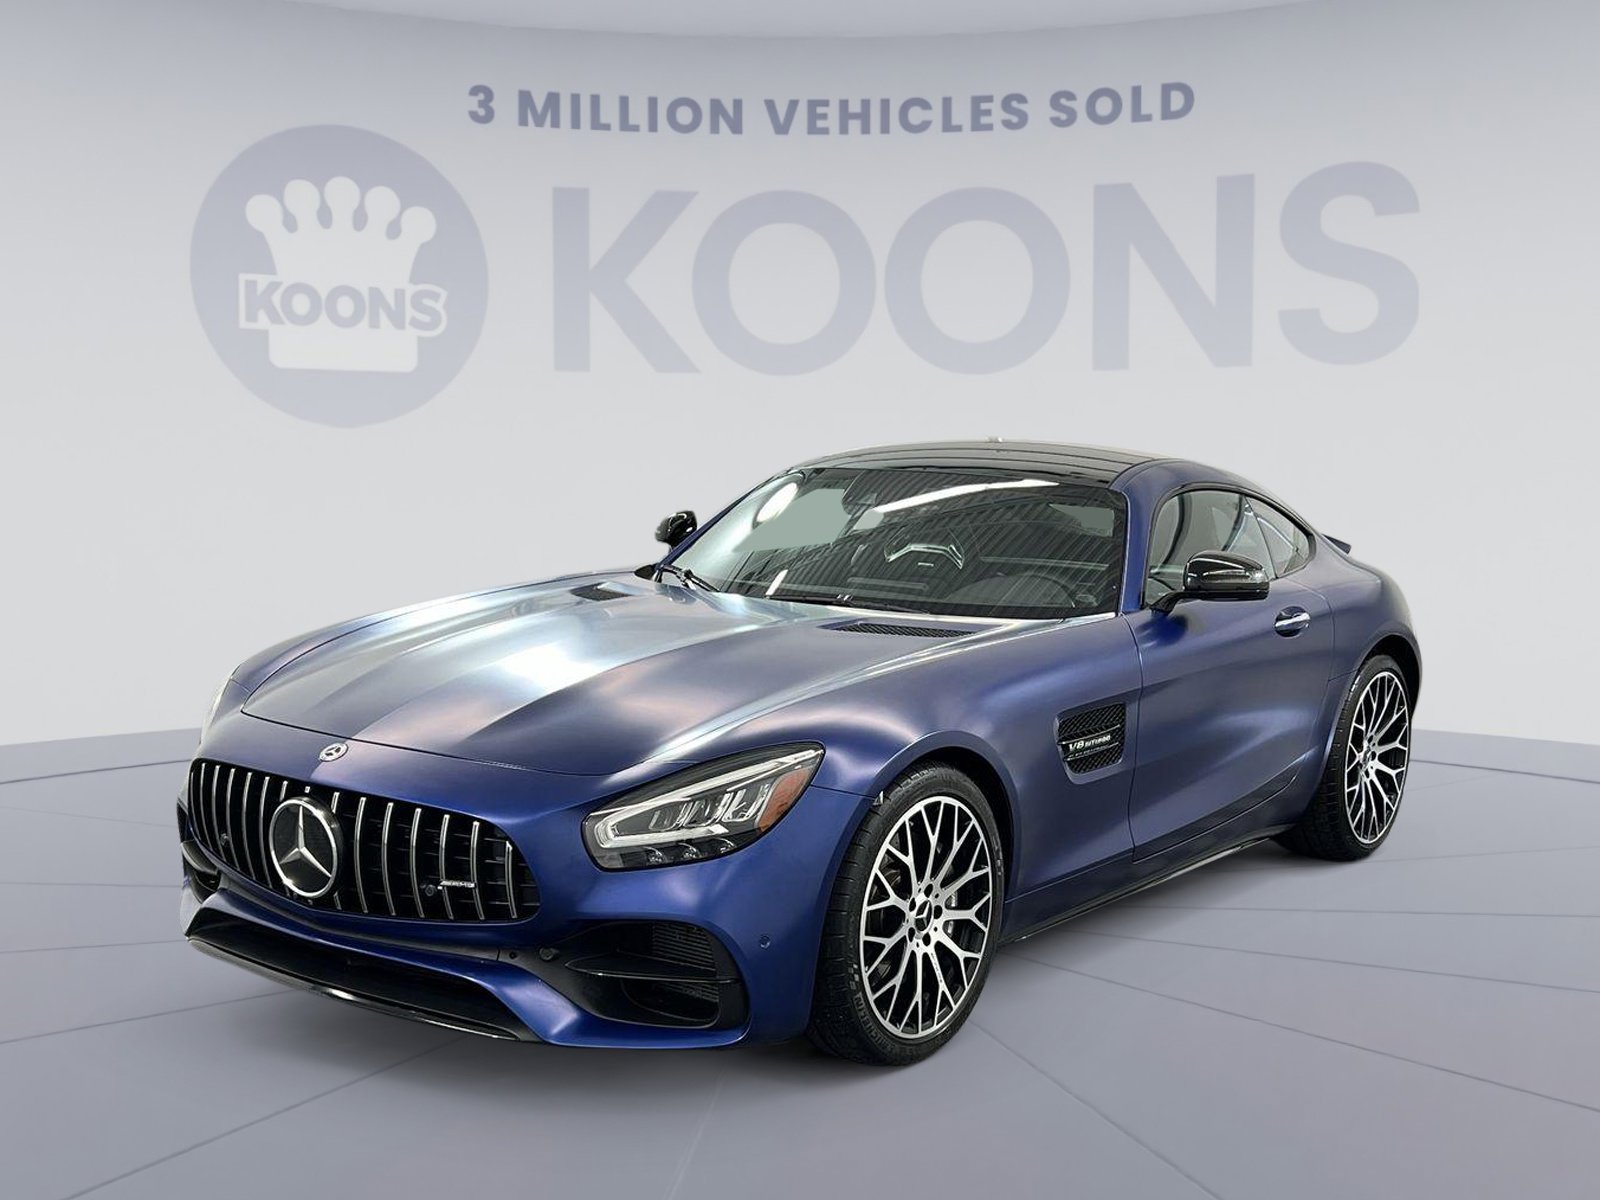 Used 2020 Mercedes-Benz AMG GT for Sale Right Now - Autotrader